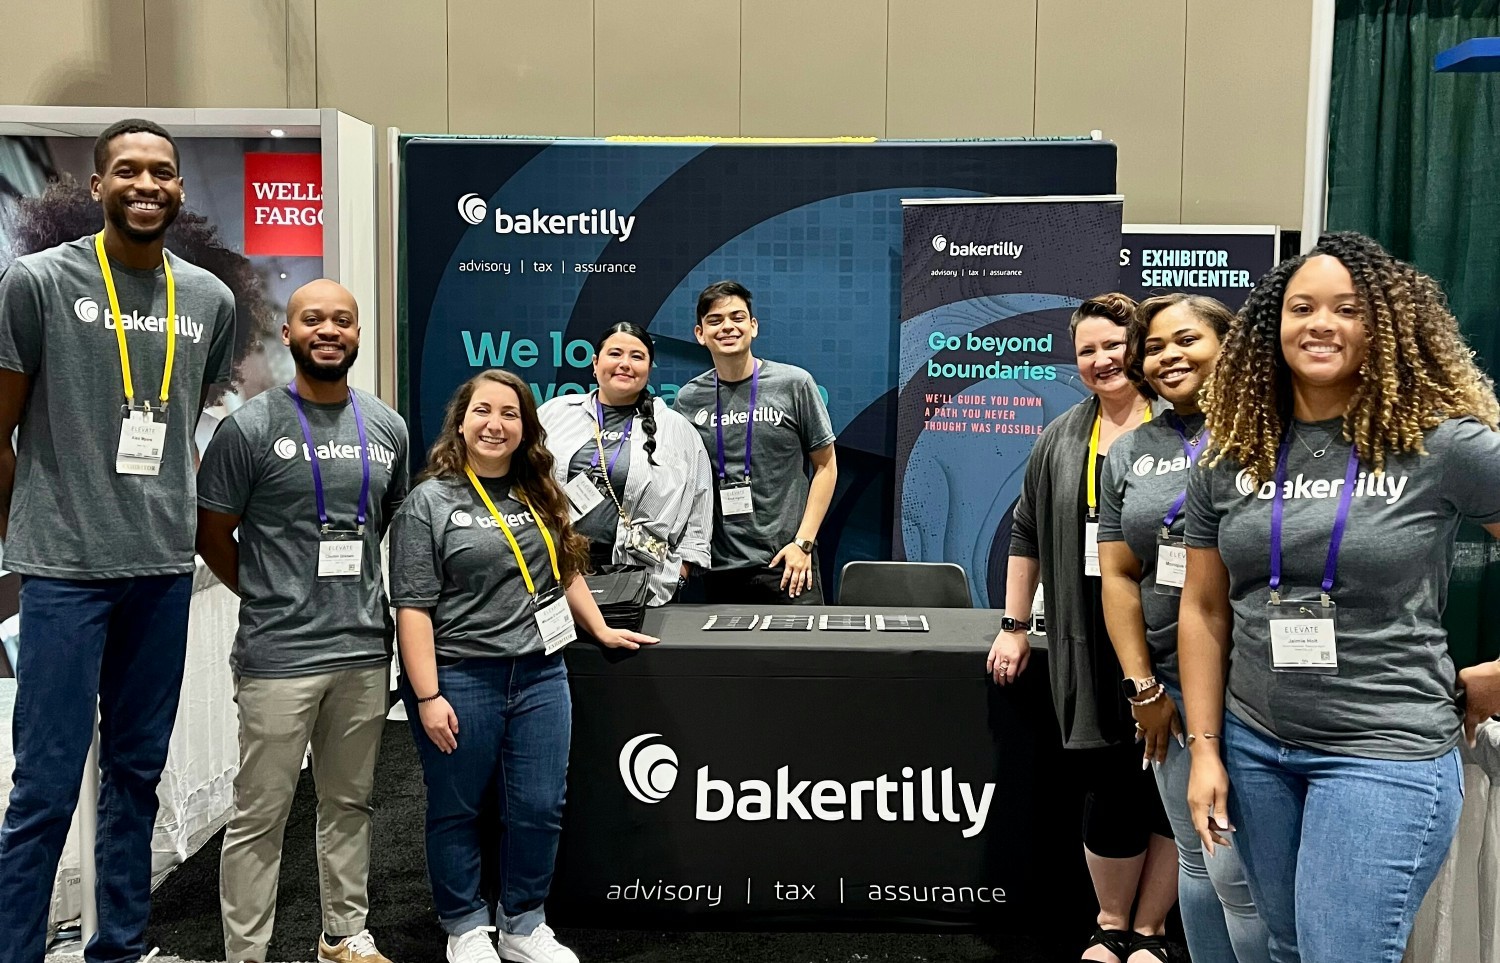 At Baker Tilly, we create an environment where every team member feels seen, heard, valued and connected.